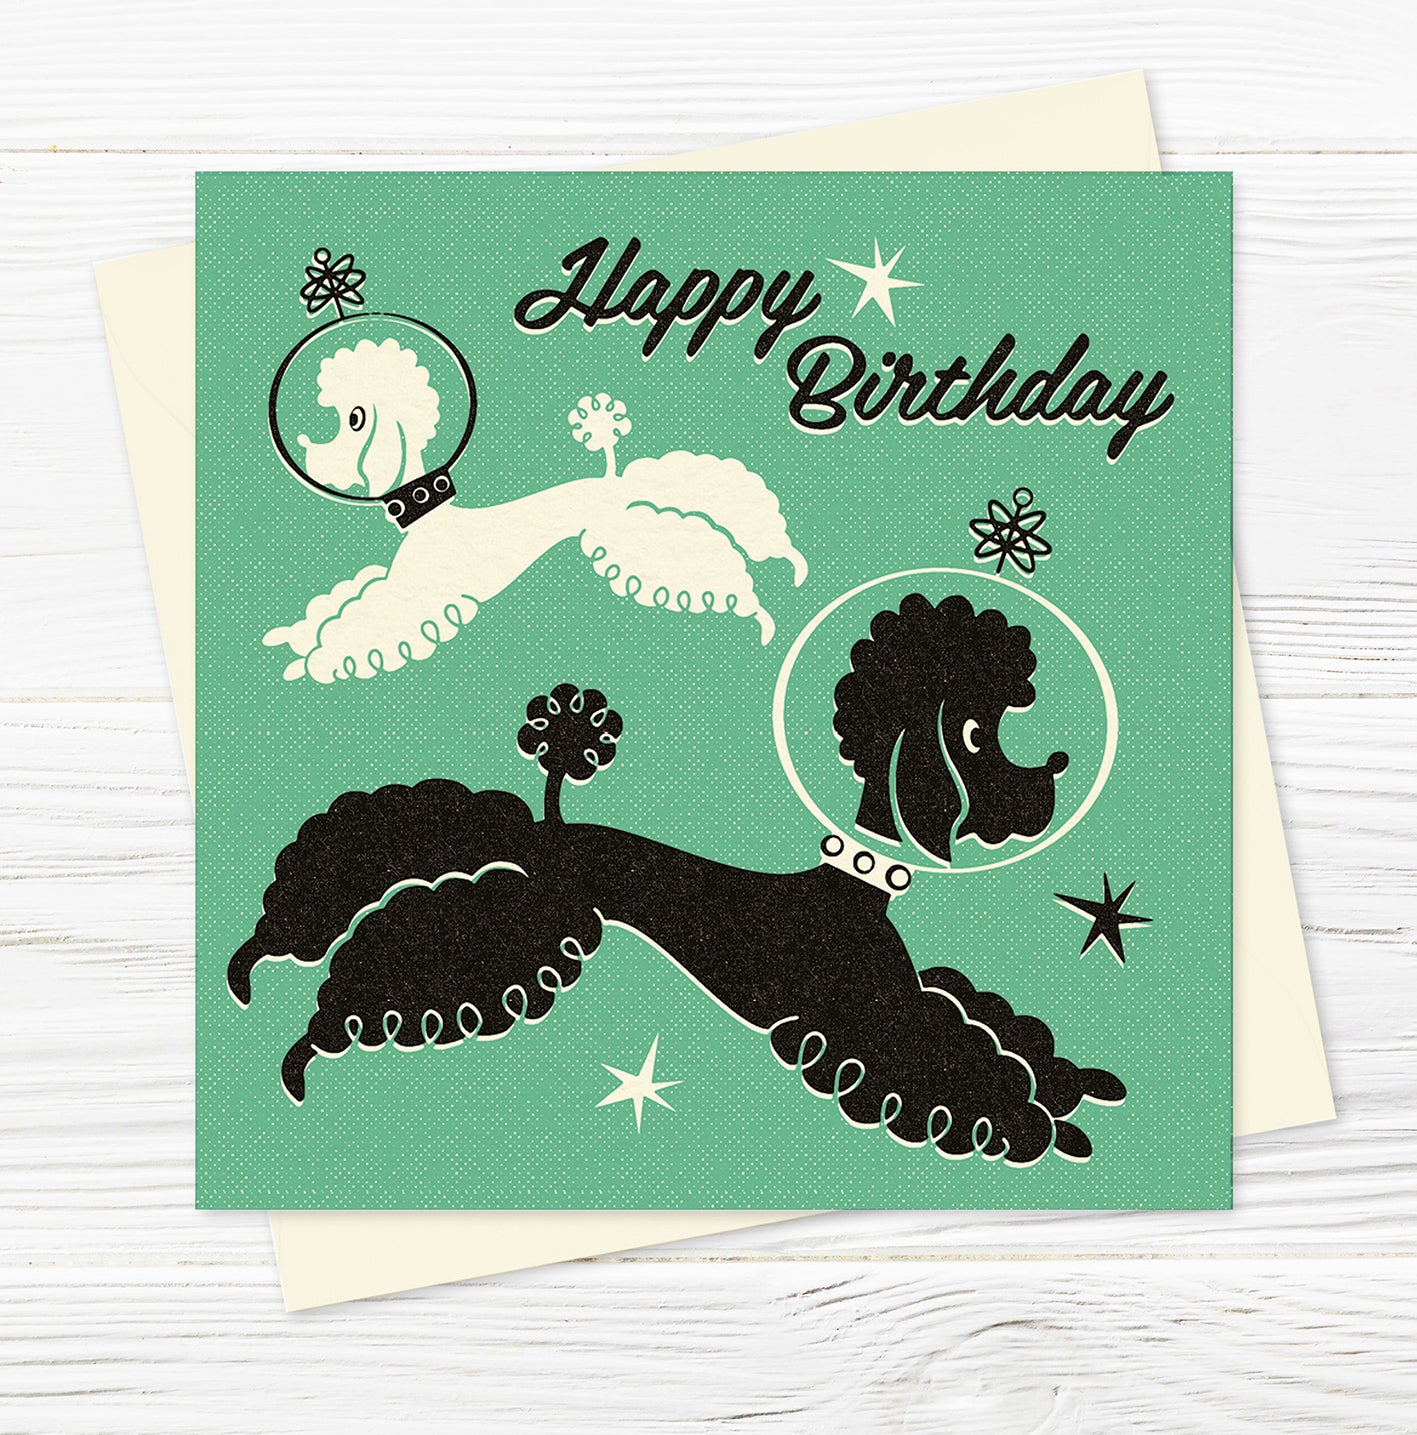 Pooch-A-Rama: Space Poodles Birthday Card